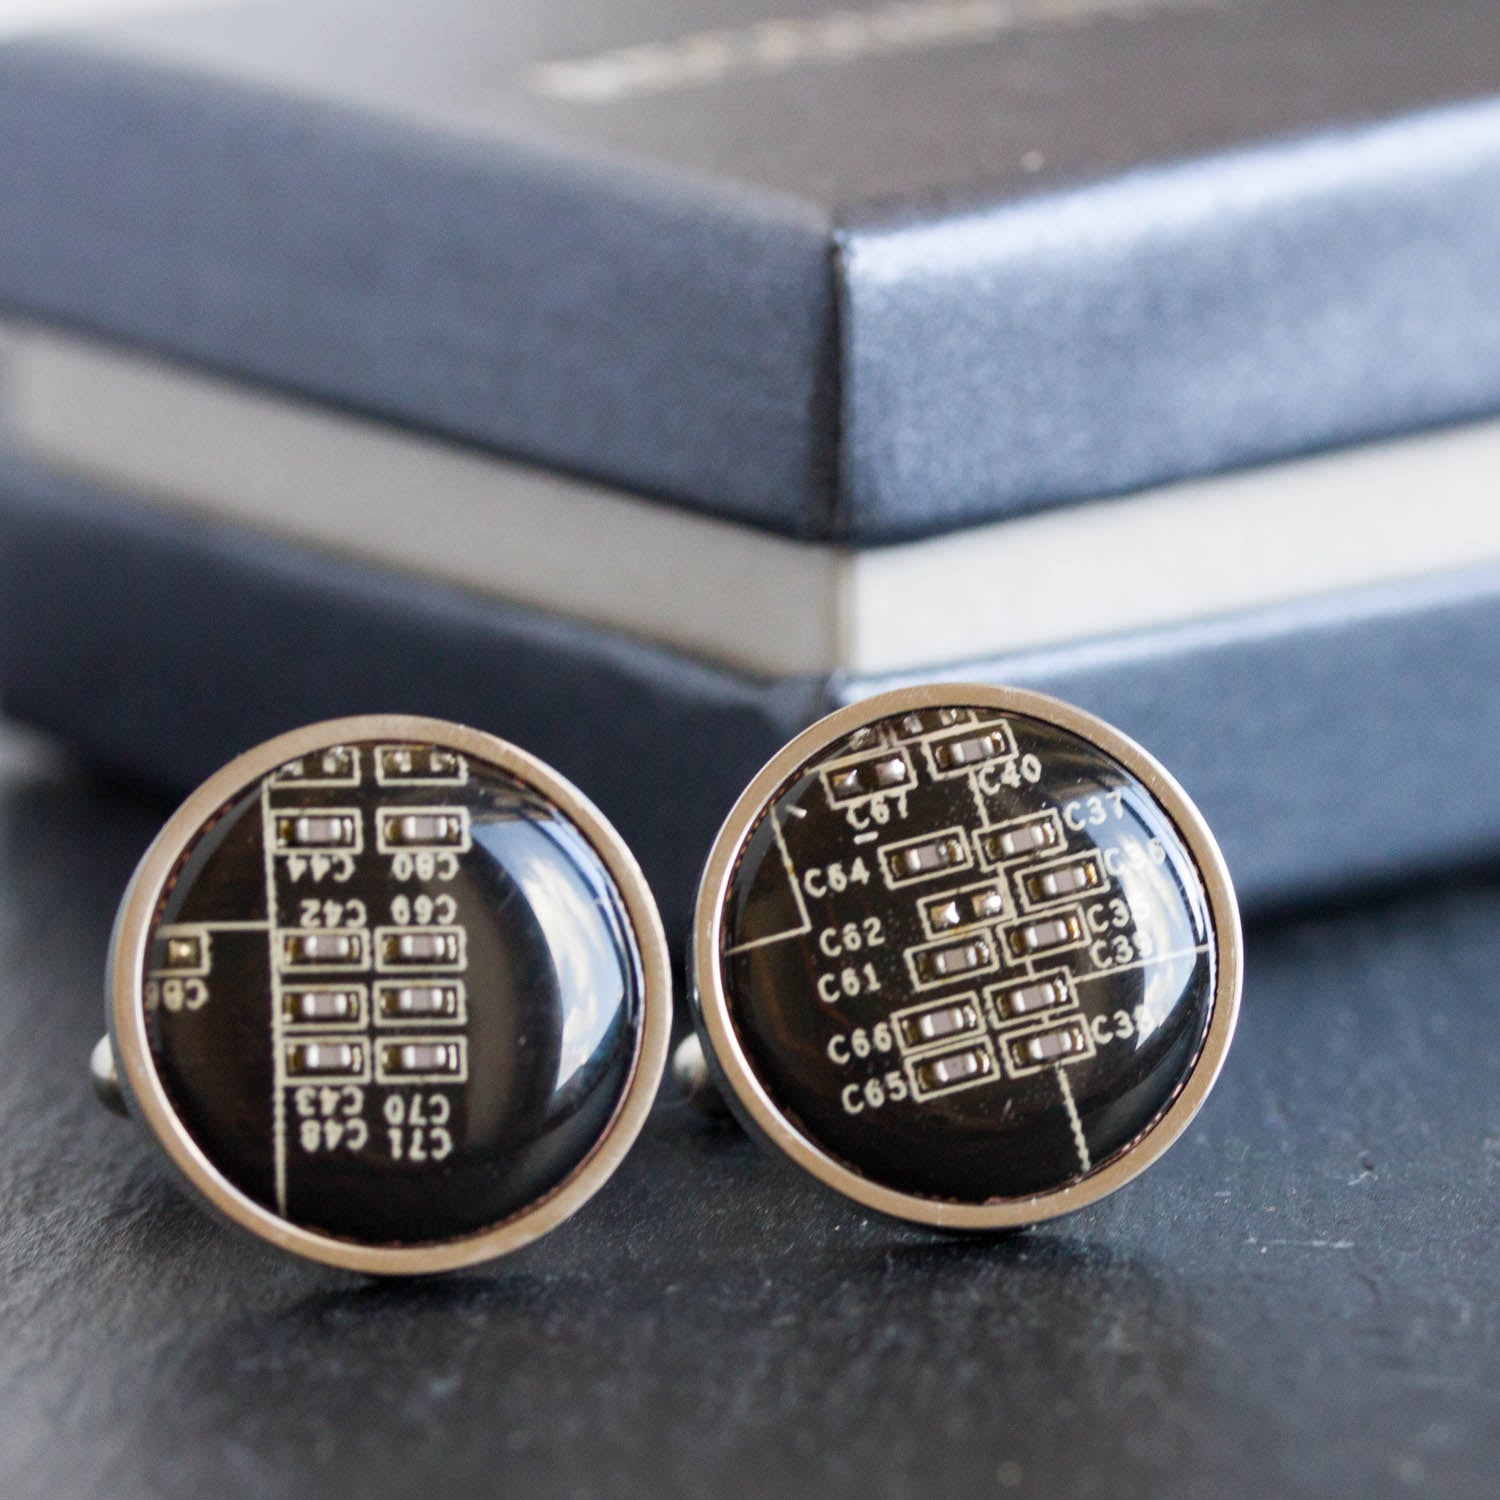 Stainless steel cufflinks with circuit board